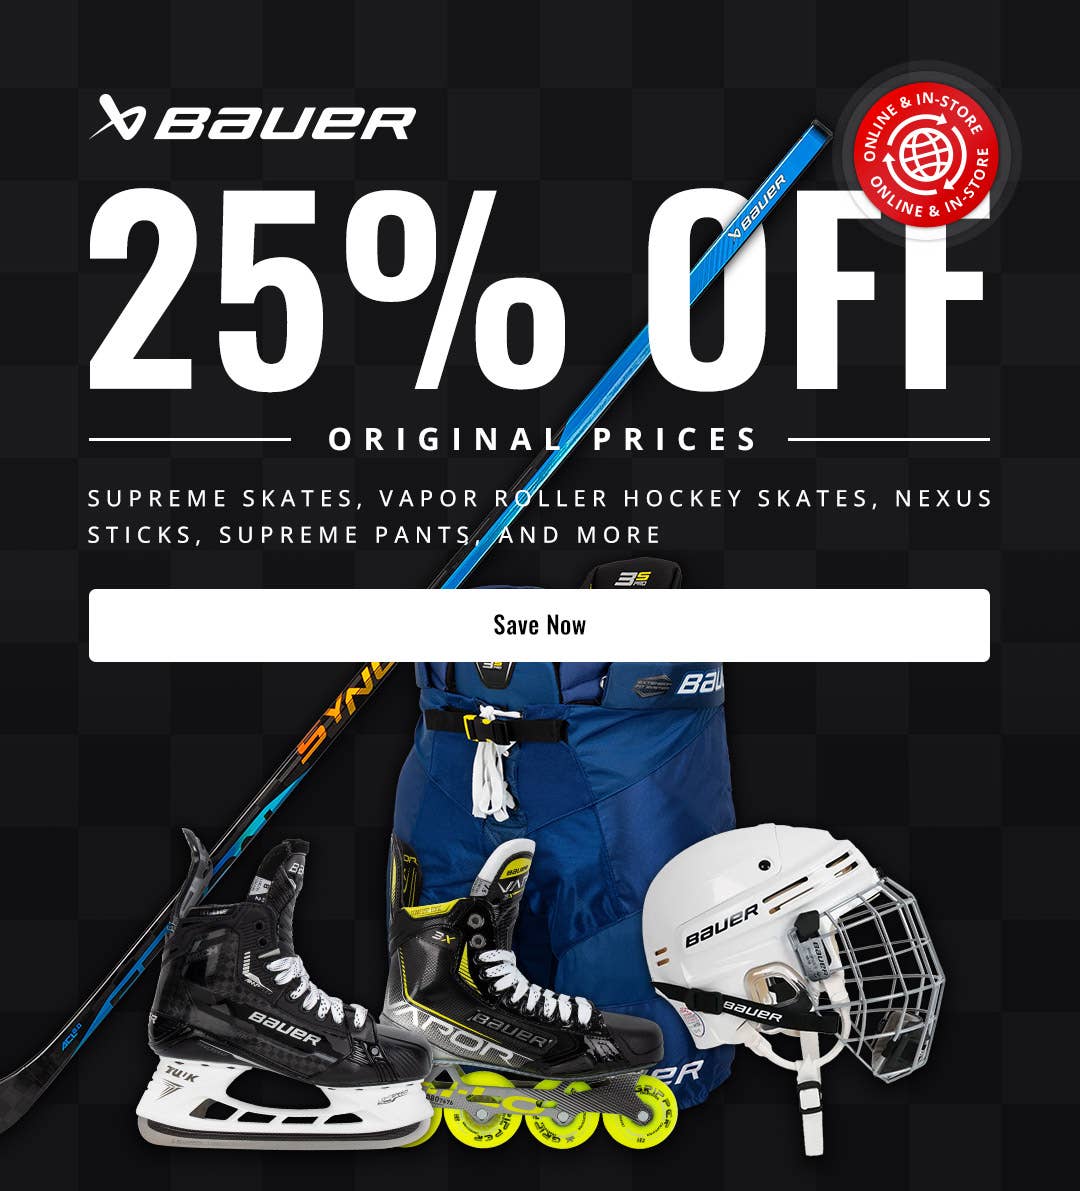 Save up to 25% on Bauer hockey equipment